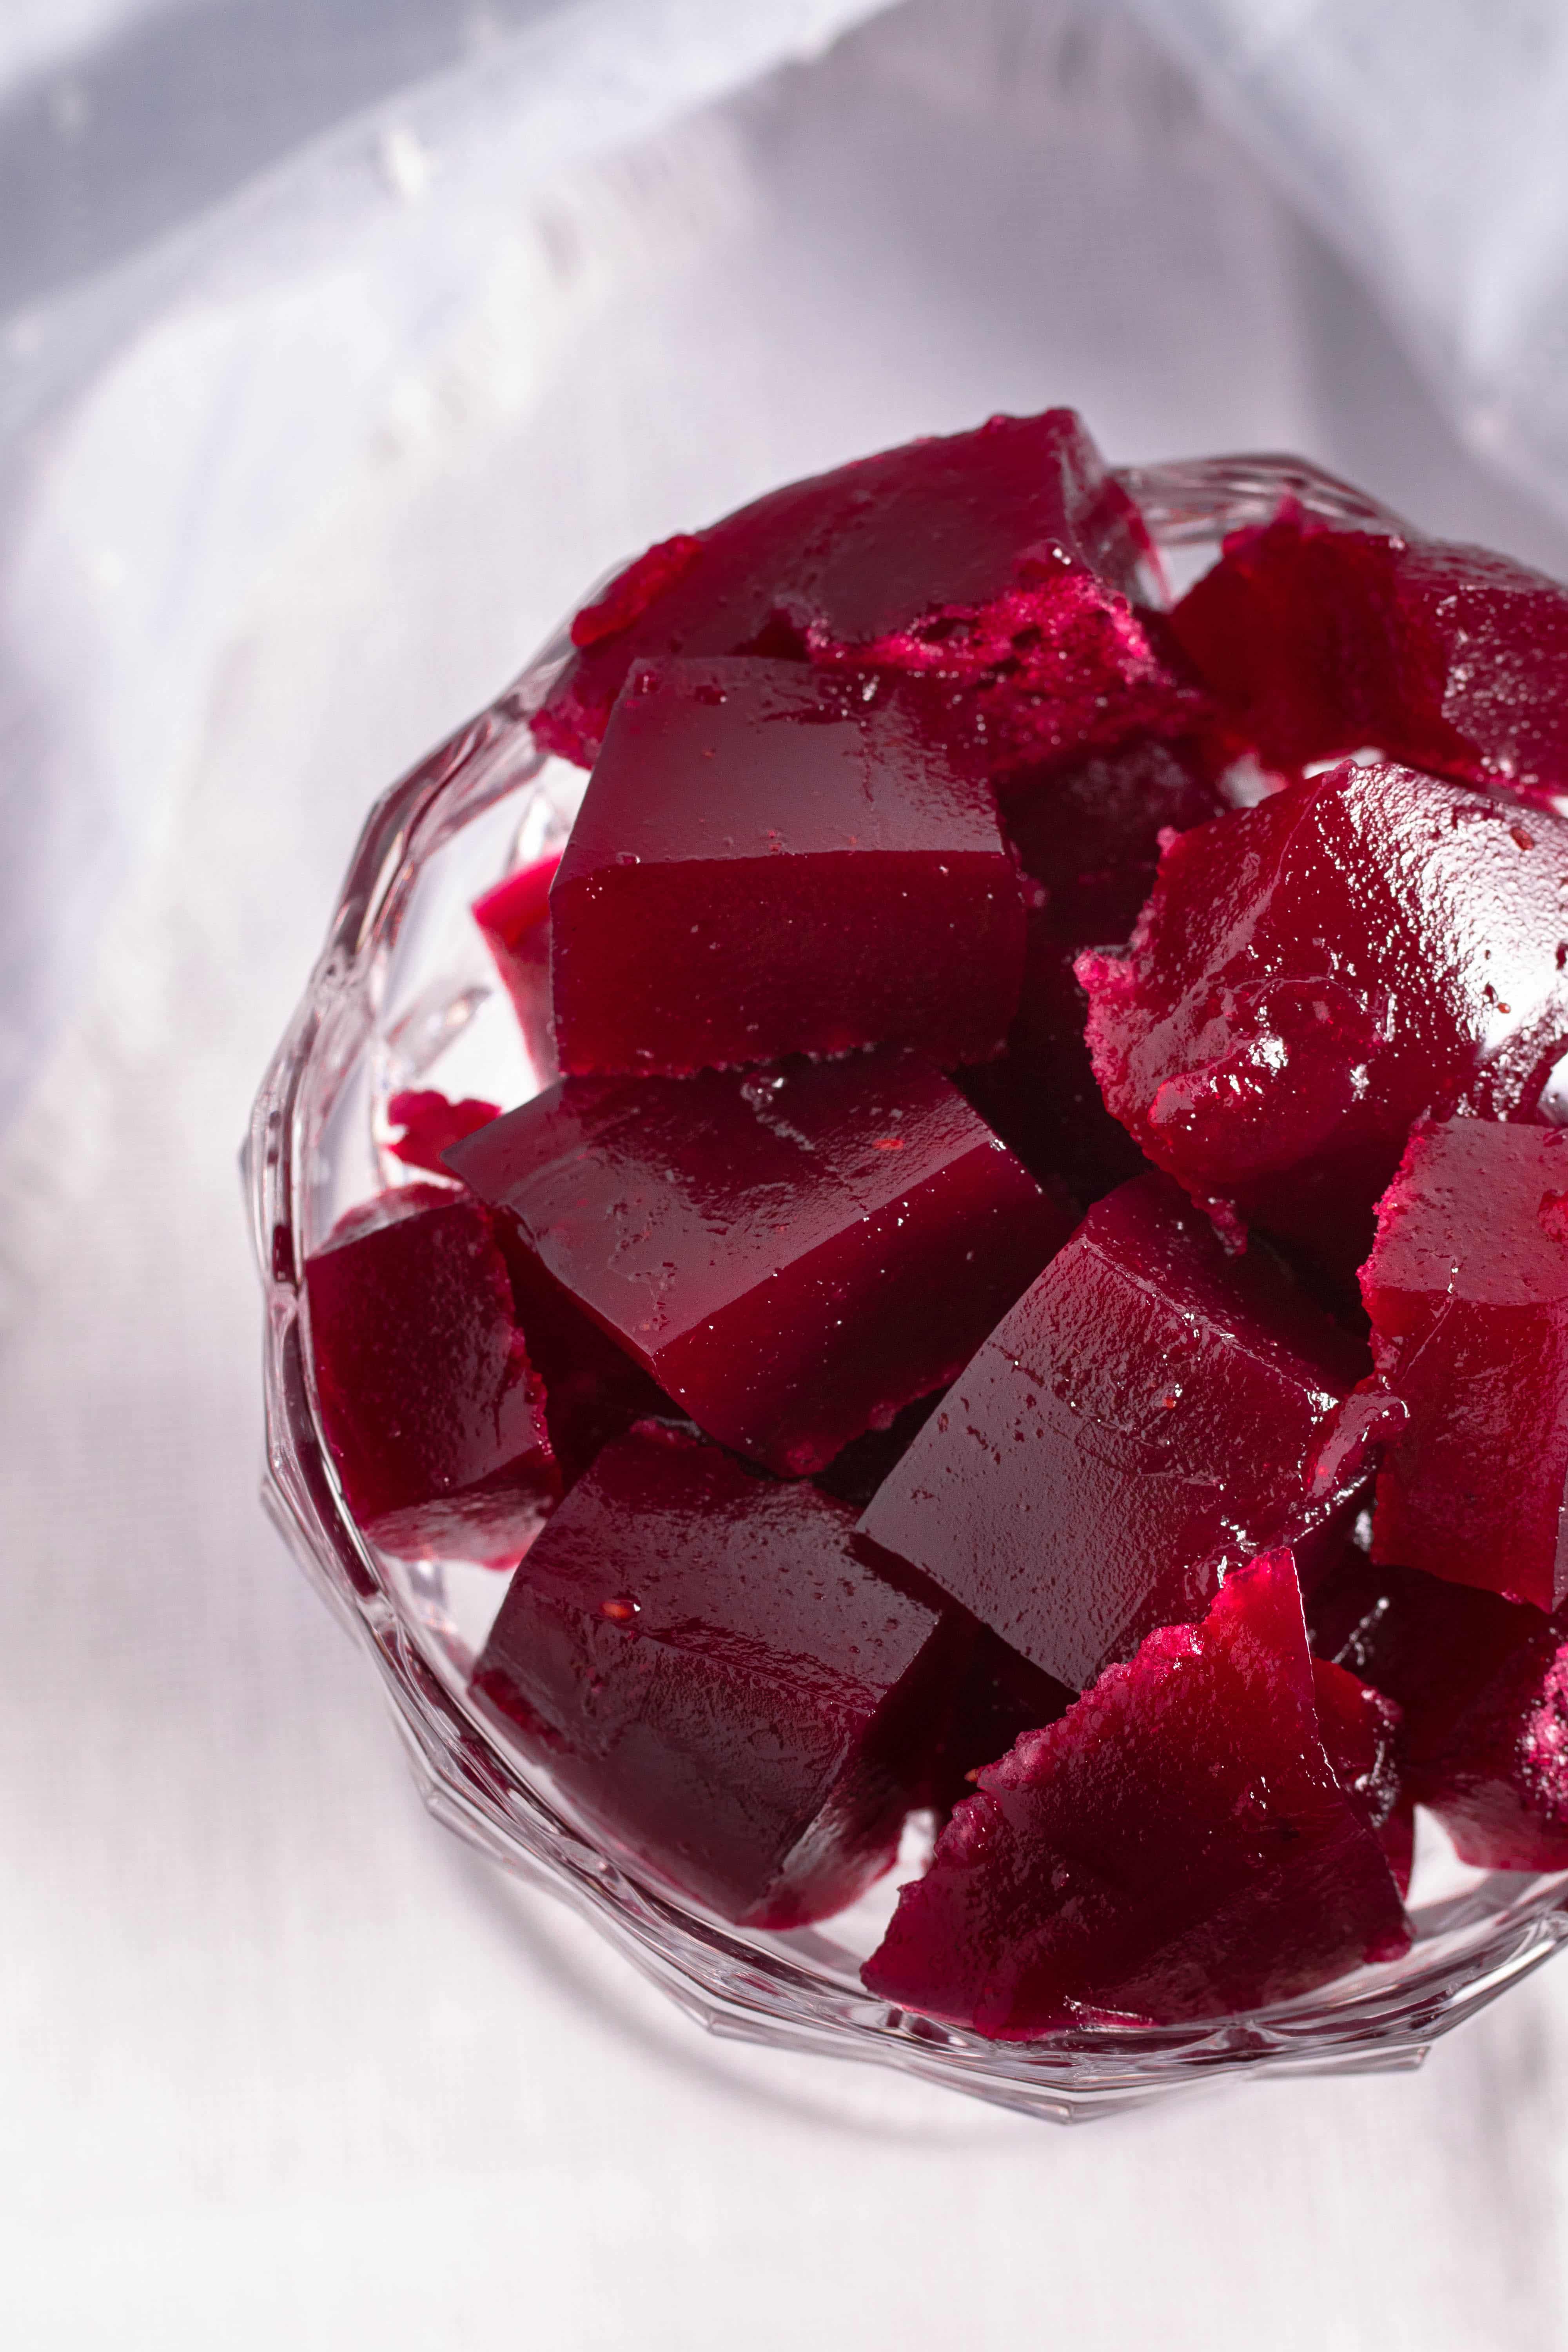 Homemade jello jigglers are a healthy kid friendly treat that is zero added sugar.